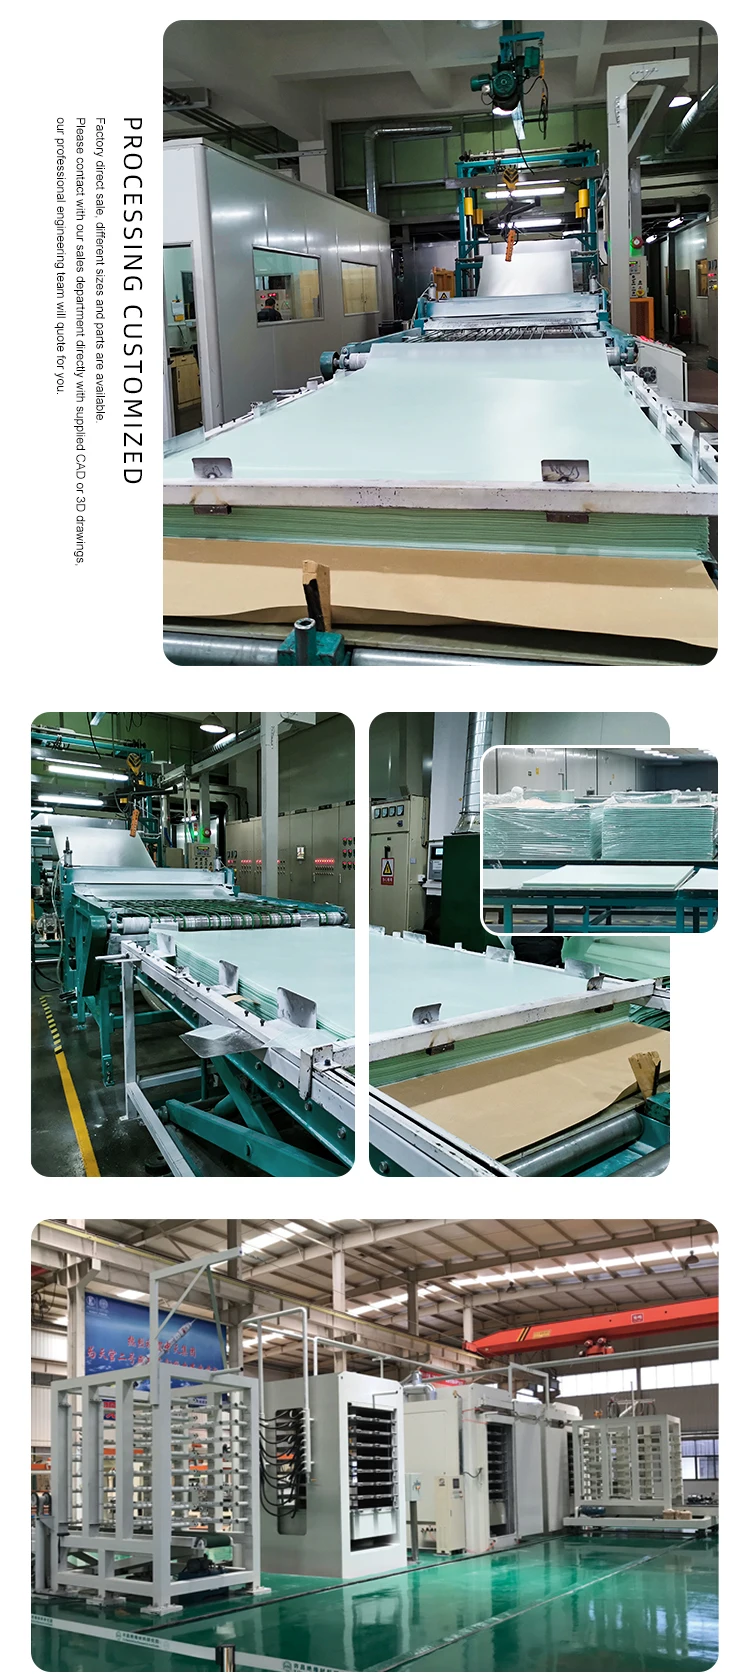 wholesales insulation material epoxy laminated glass cloth board